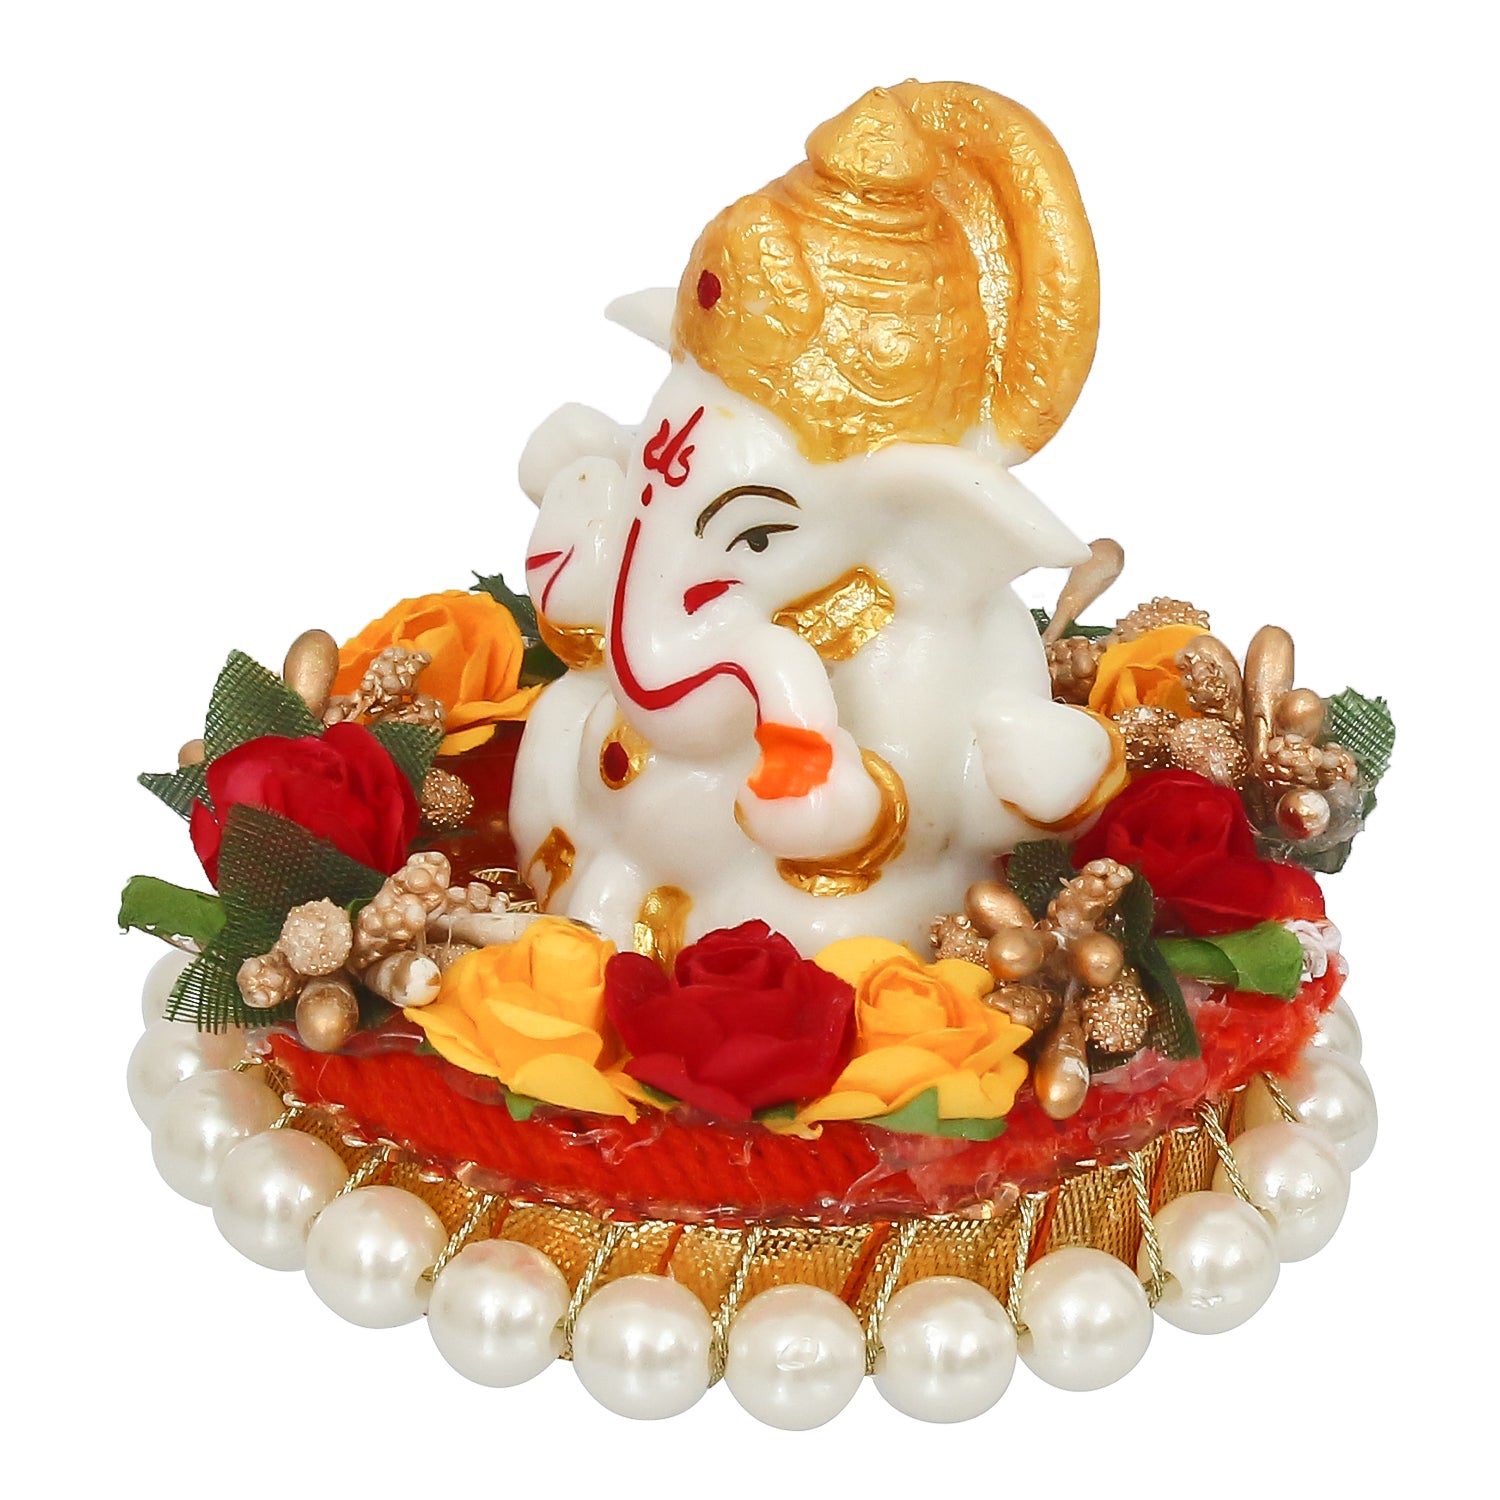 Polyresin Lord Ganesha Statue on Decorative Handcrafted Plate for Home, Office and Car Dashboard 7